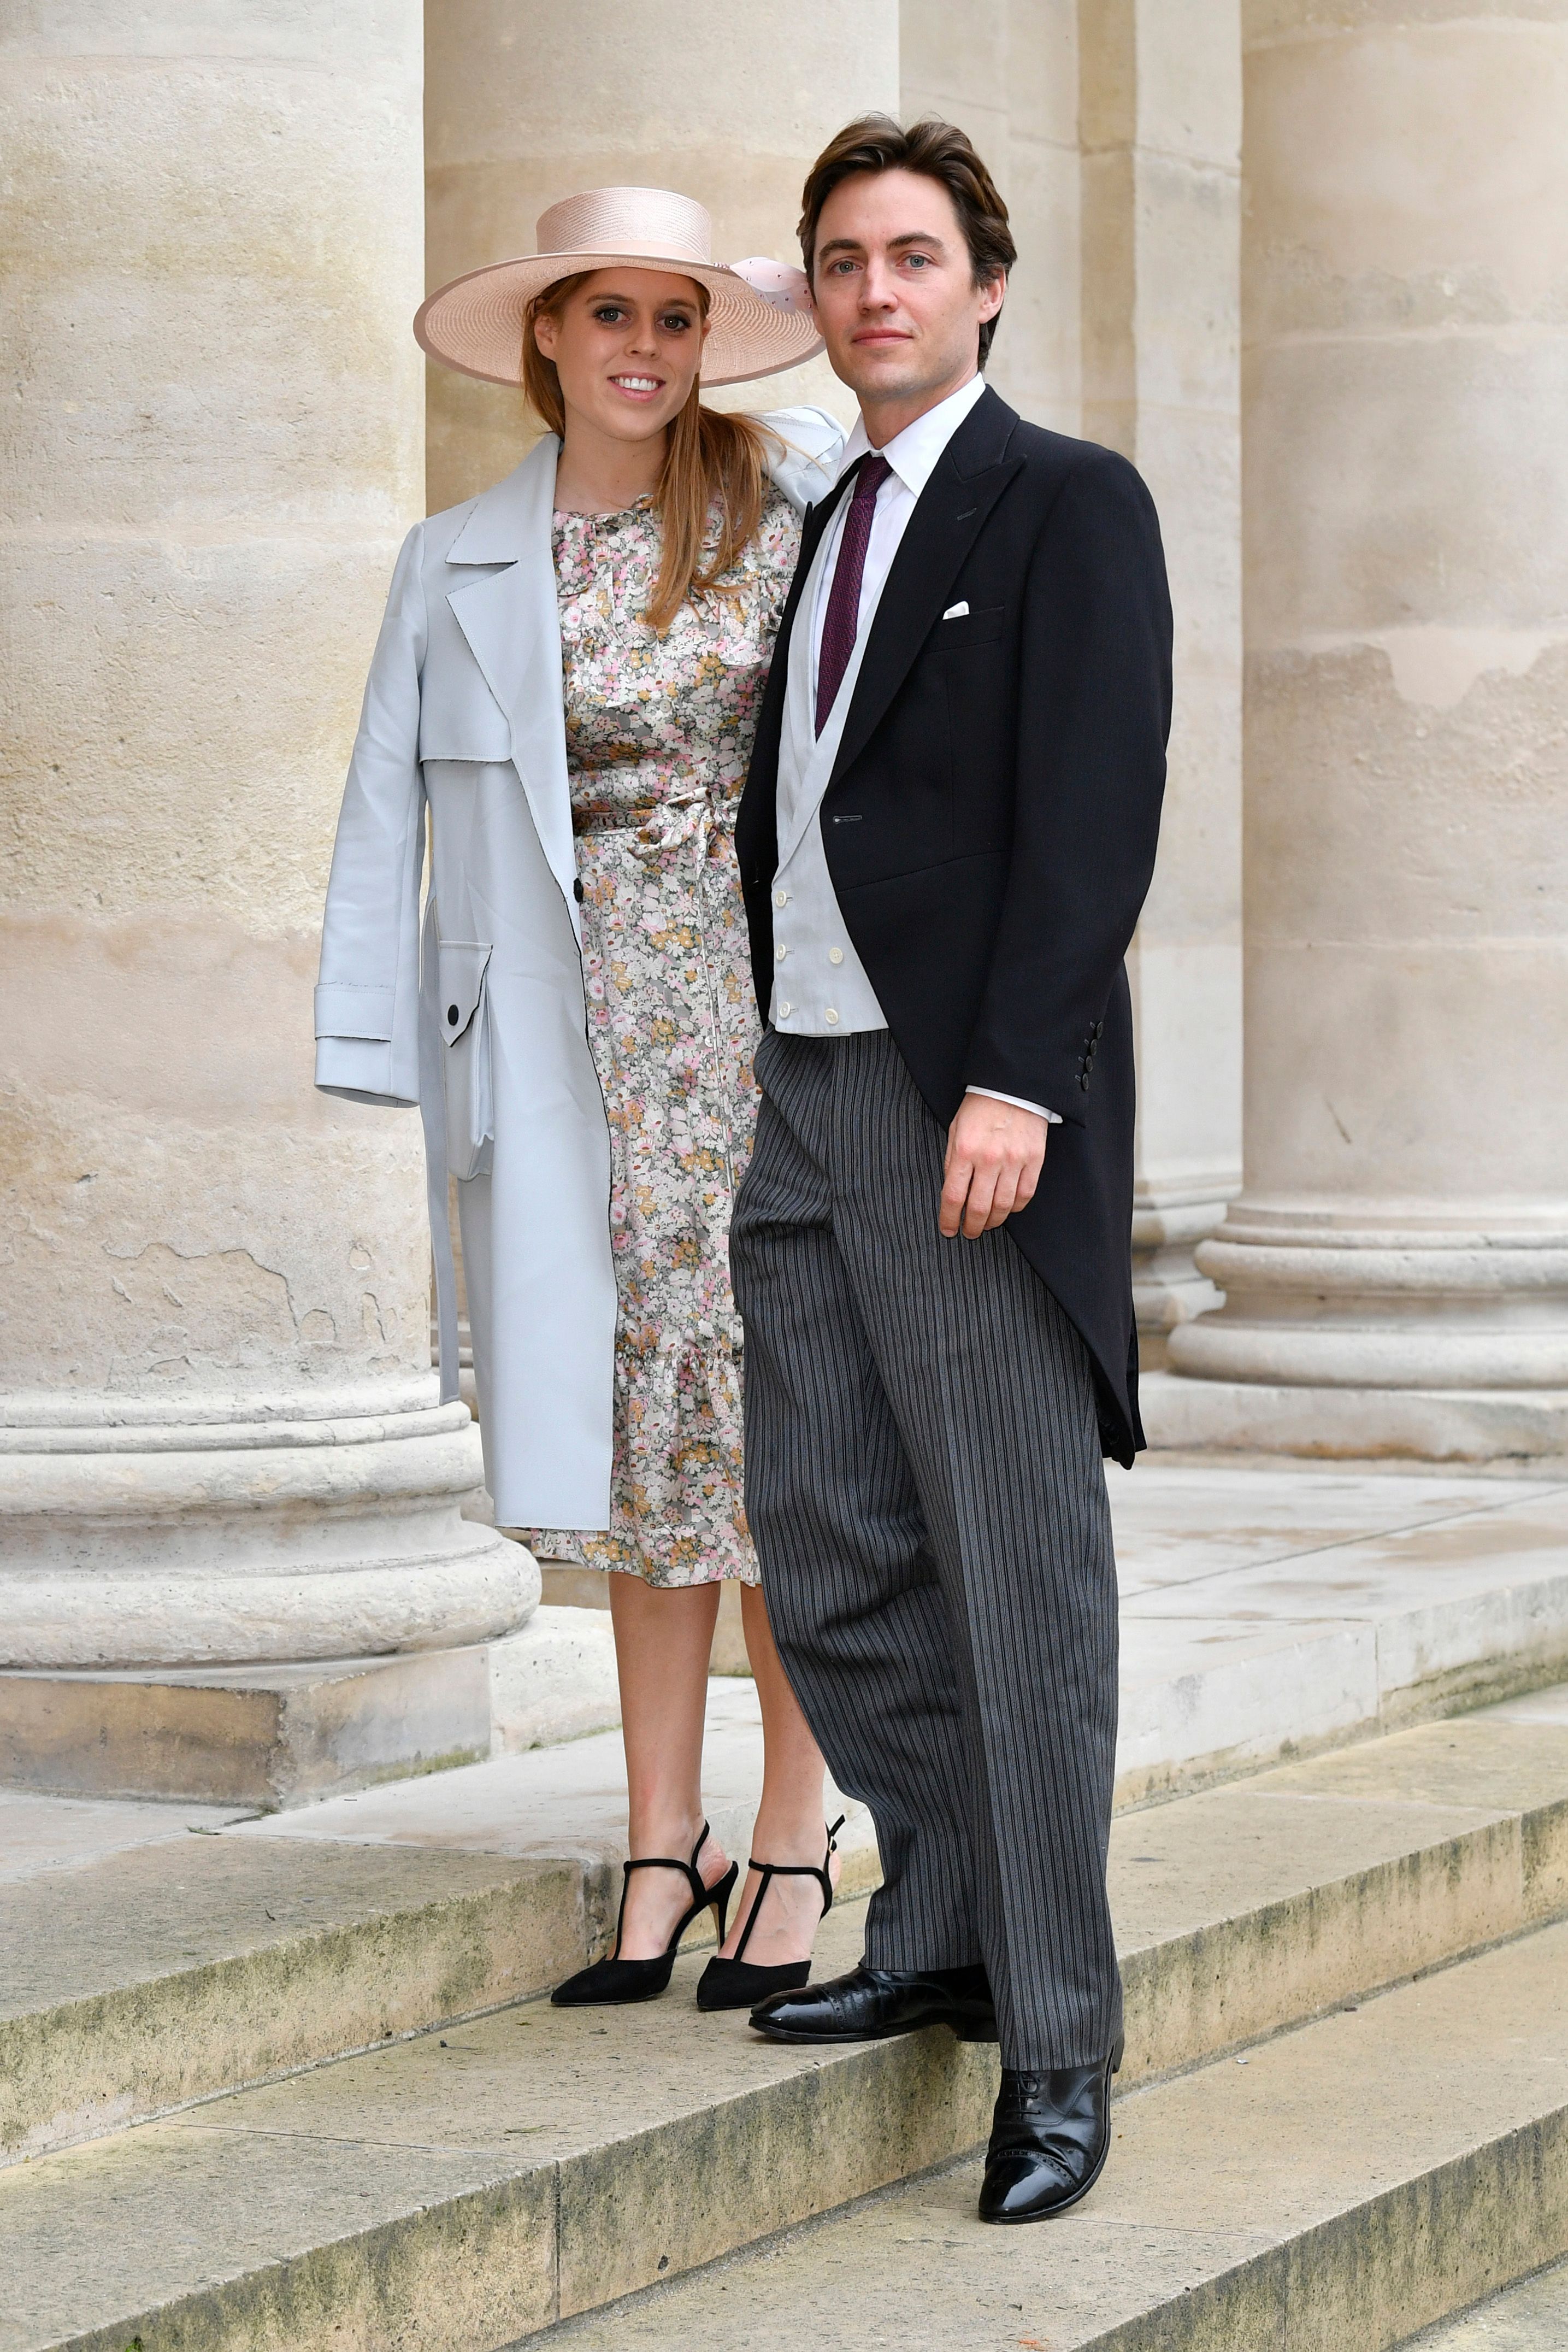 Princess Beatrice d’York and Edoardo Mapelli Mozzi at the Wedding of Prince Jean-Christophe Napoleon and Olympia Von Arco-Zinneberg at Les Invalides on October 19, 2019 in Paris, France | Photo: Getty Images 